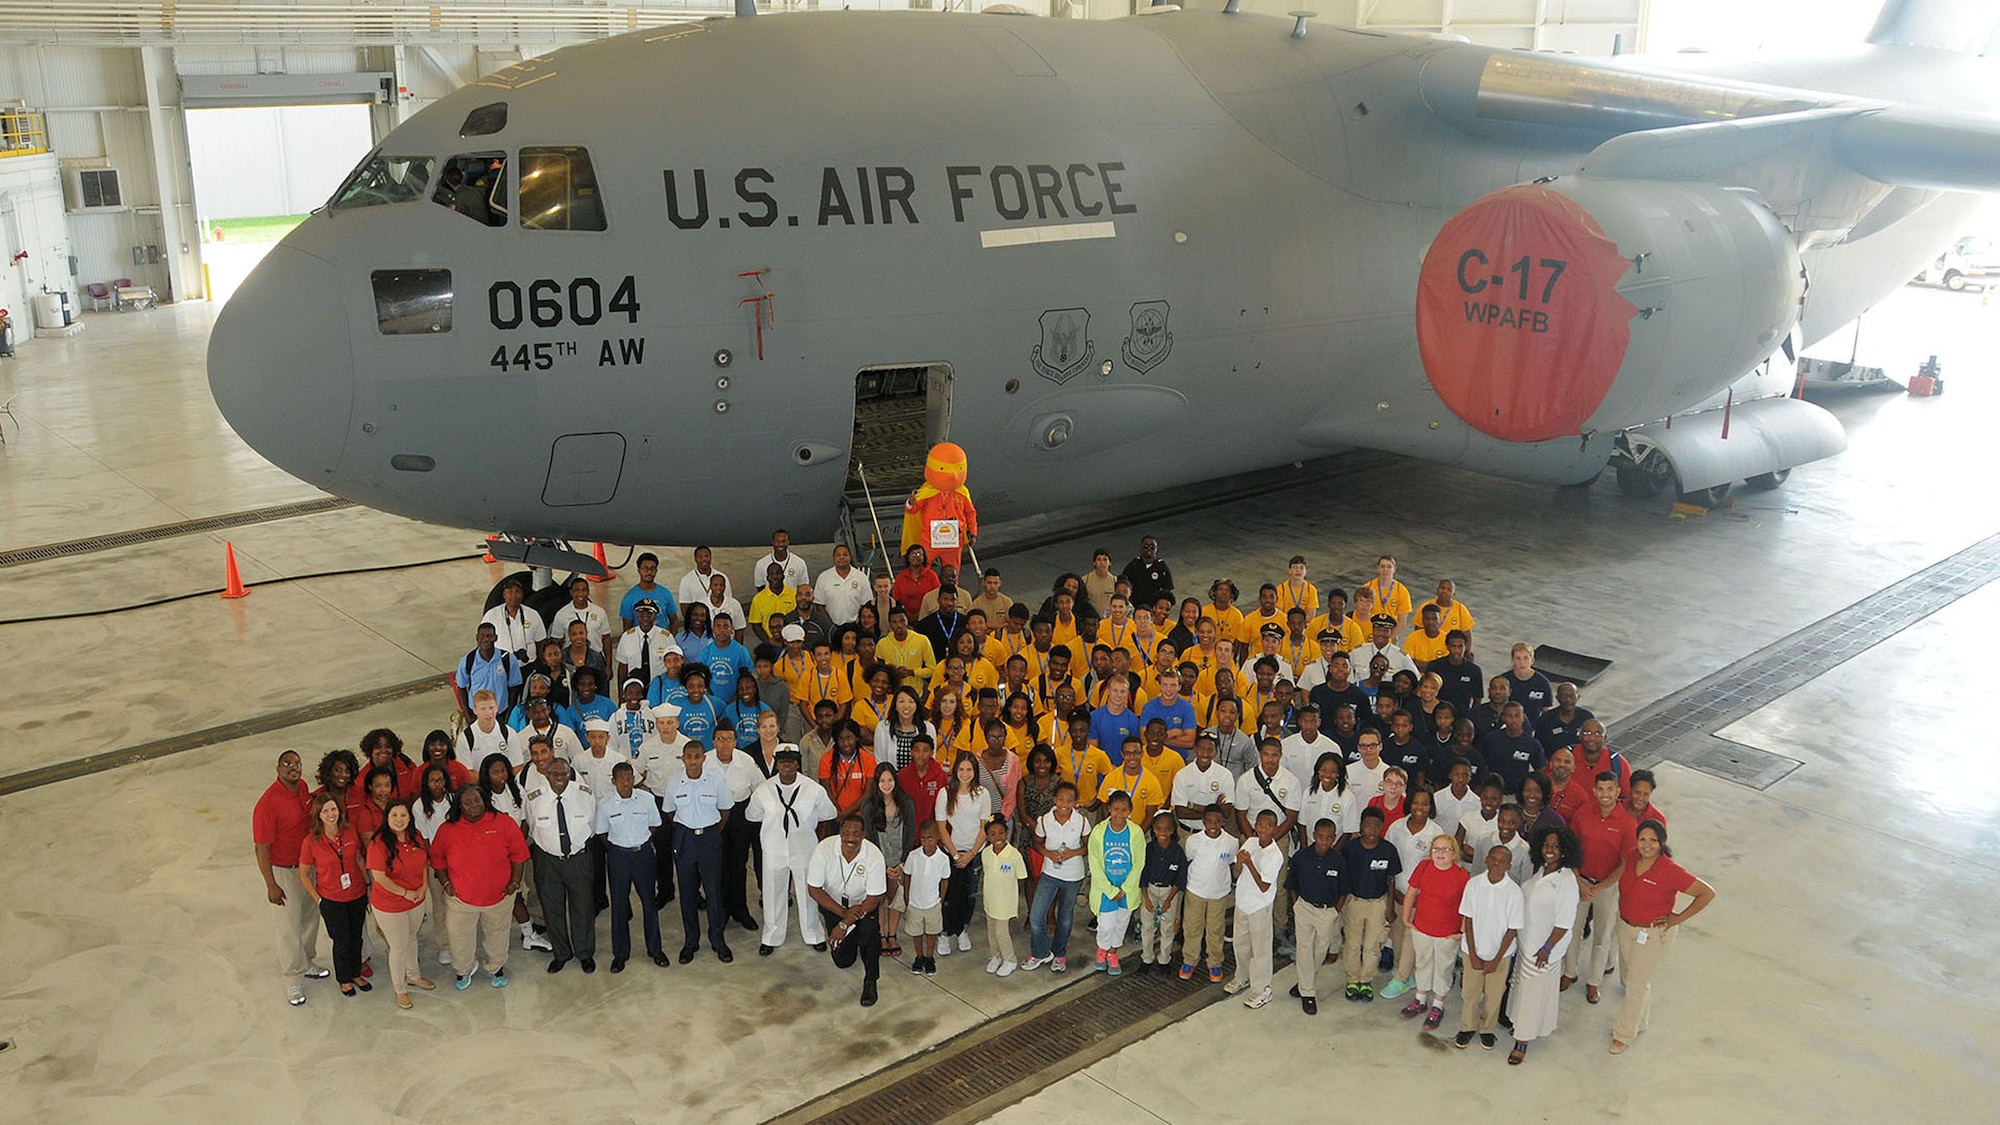 More than 180 students ages 14-18 and their chaperons visited the 445th Airlift Wing July 22, 2015 as part of the 16th Annual Delta Airlines sponsored Dream Flight program. Delta and the Organization of Black Aerospace Professionals flew the young aviation enthusiasts from Atlanta, Georgia, to Dayton, Ohio. The group visited with Airmen from the 445th AW then visited the National Museum of the United States Air Force. (U.S. Air Force photo/Tech. Sgt. Anthony Springer)
